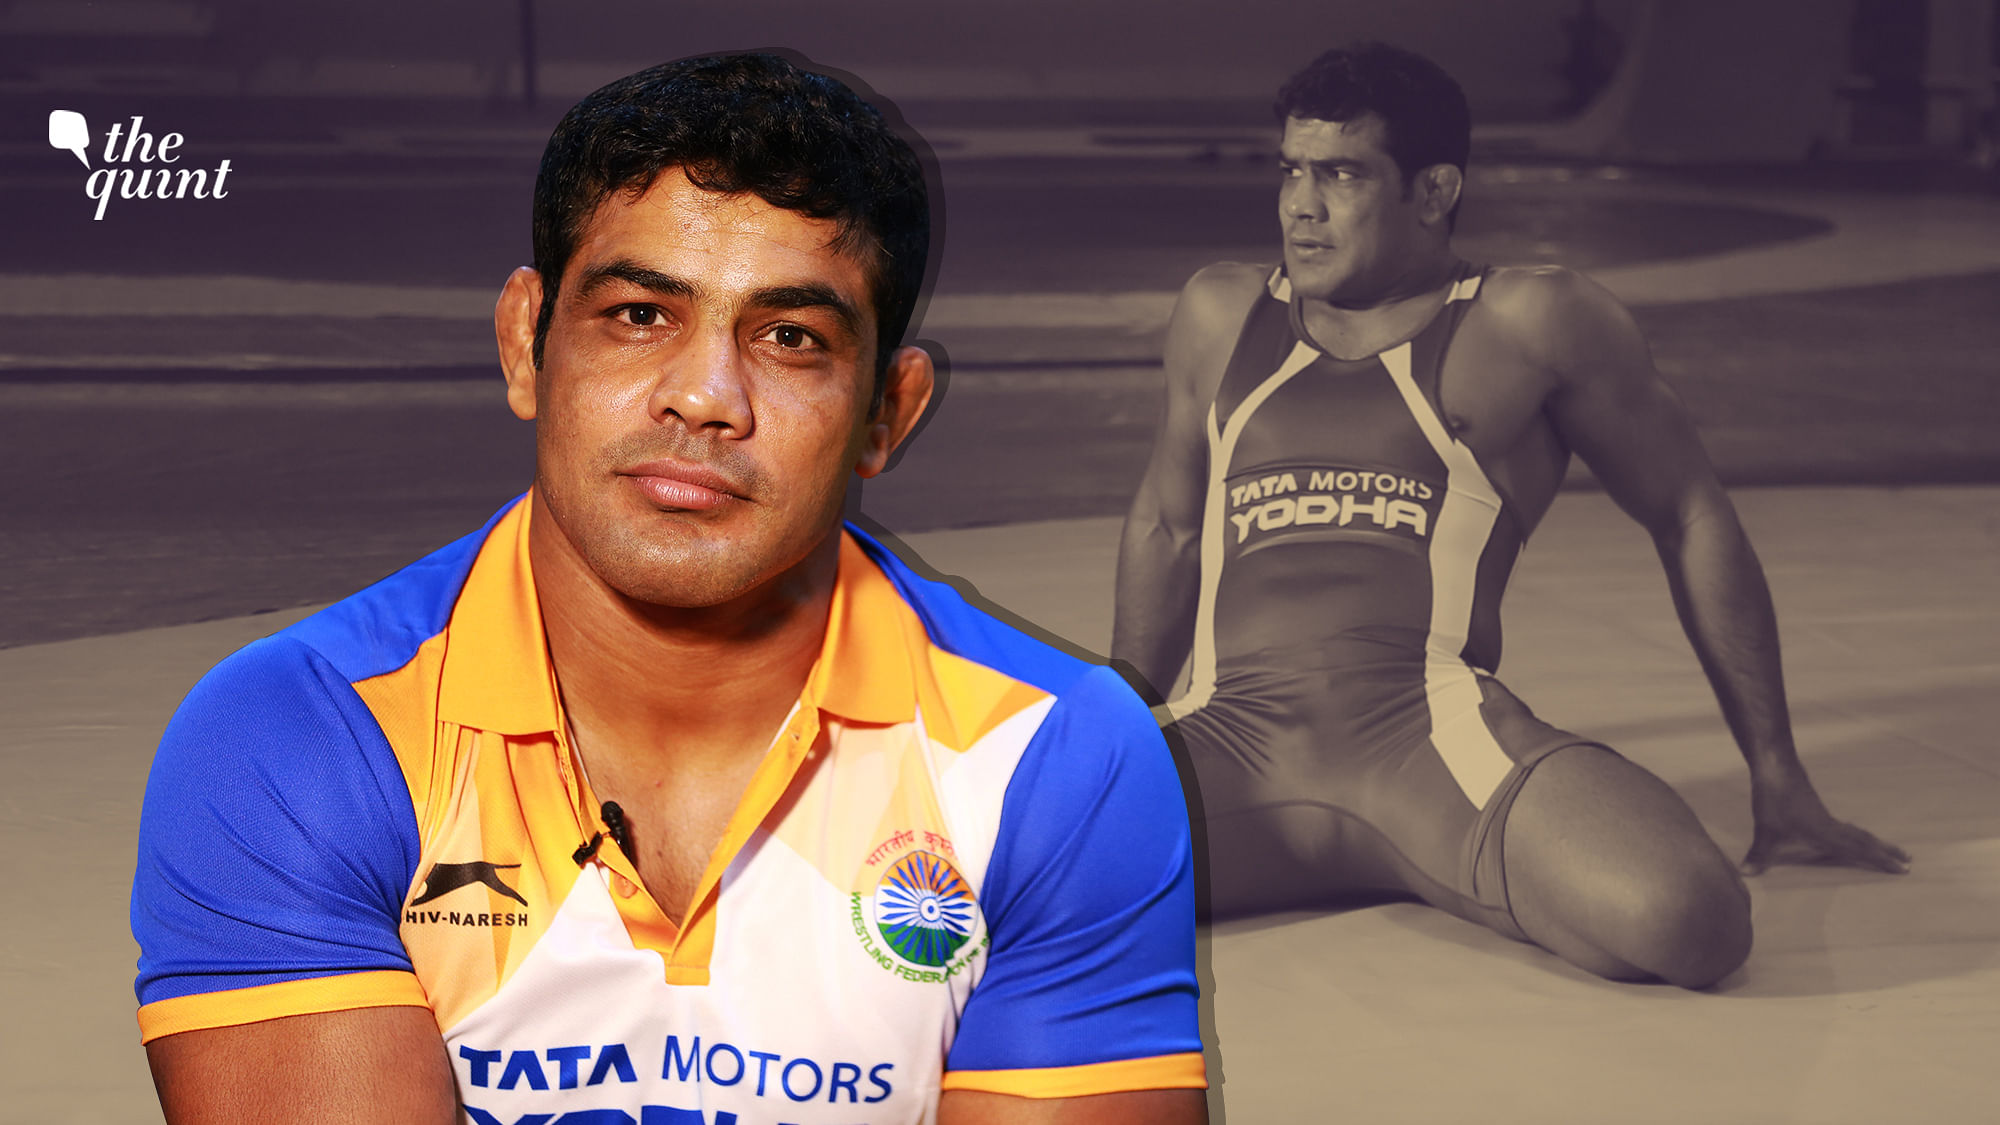 The Quint spoke to Indian wrestler Sushil Kumar ahead of his sixth World Championships.